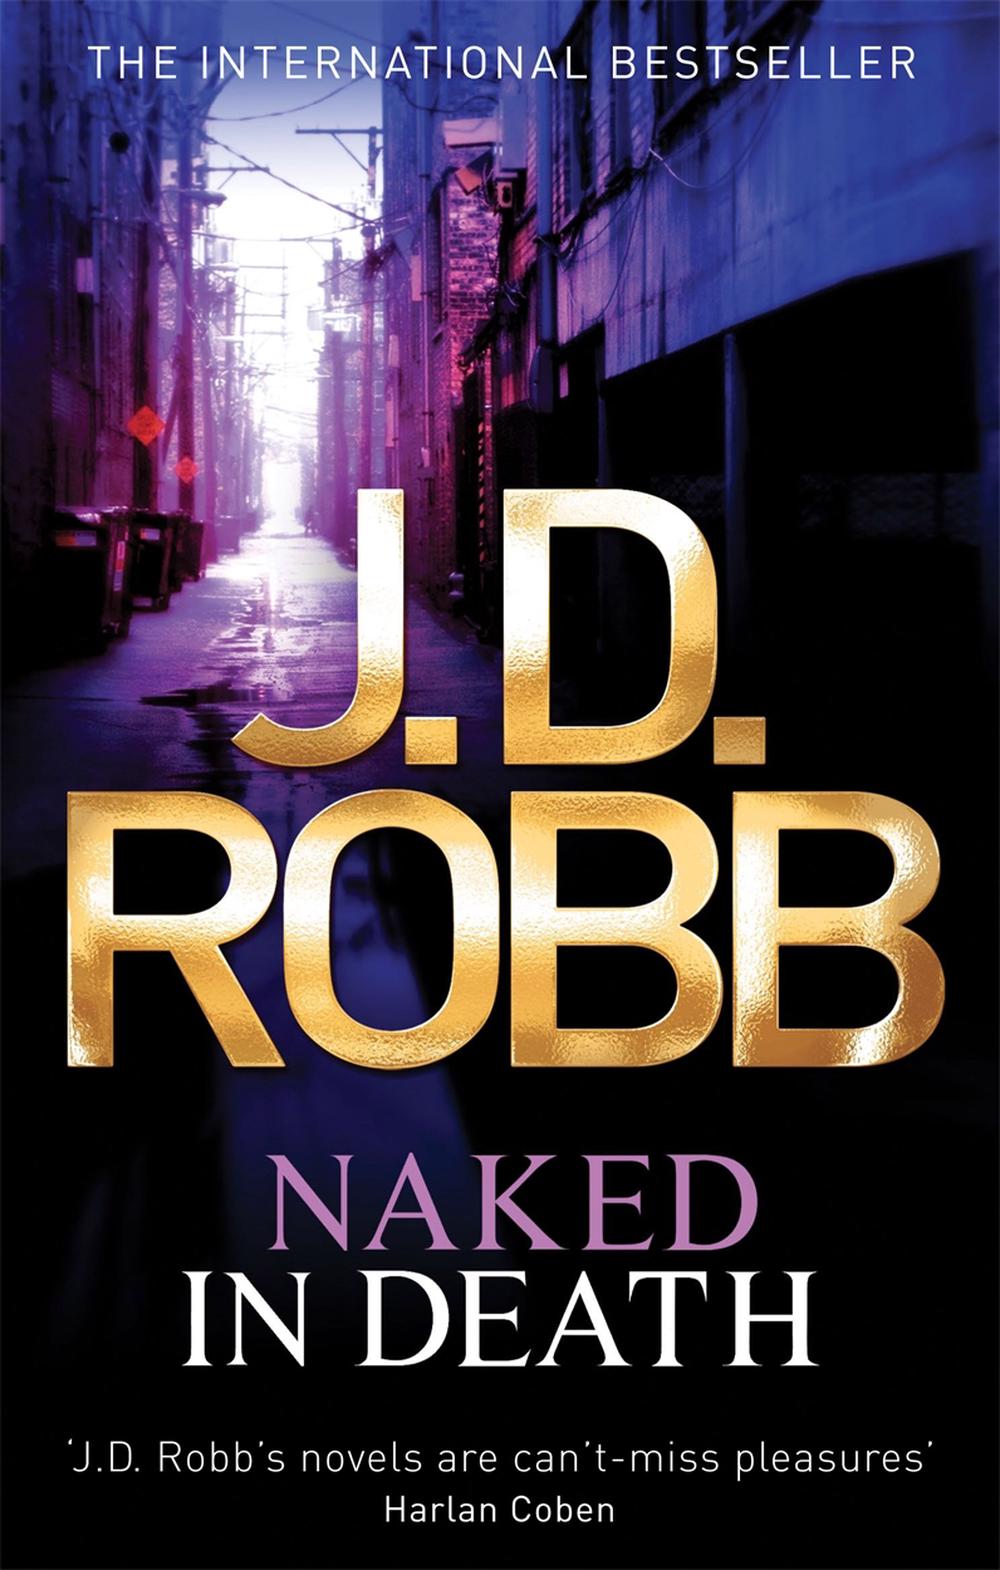 Naked in Death (In Death #1) by J.D. Robb